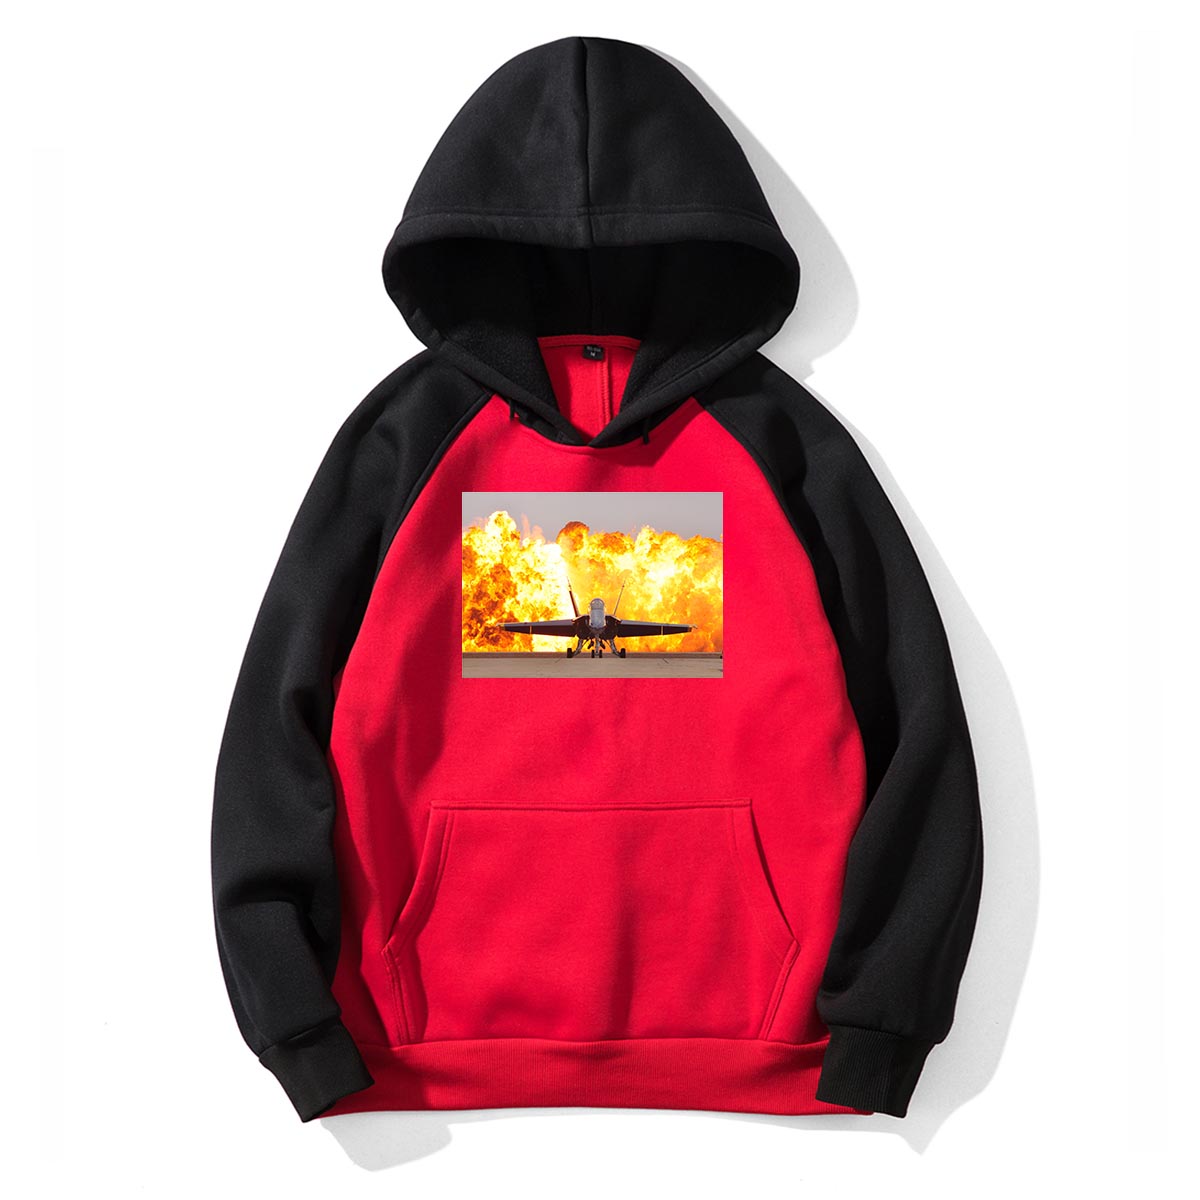 Face to Face with Air Force Jet & Flames Designed Colourful Hoodies